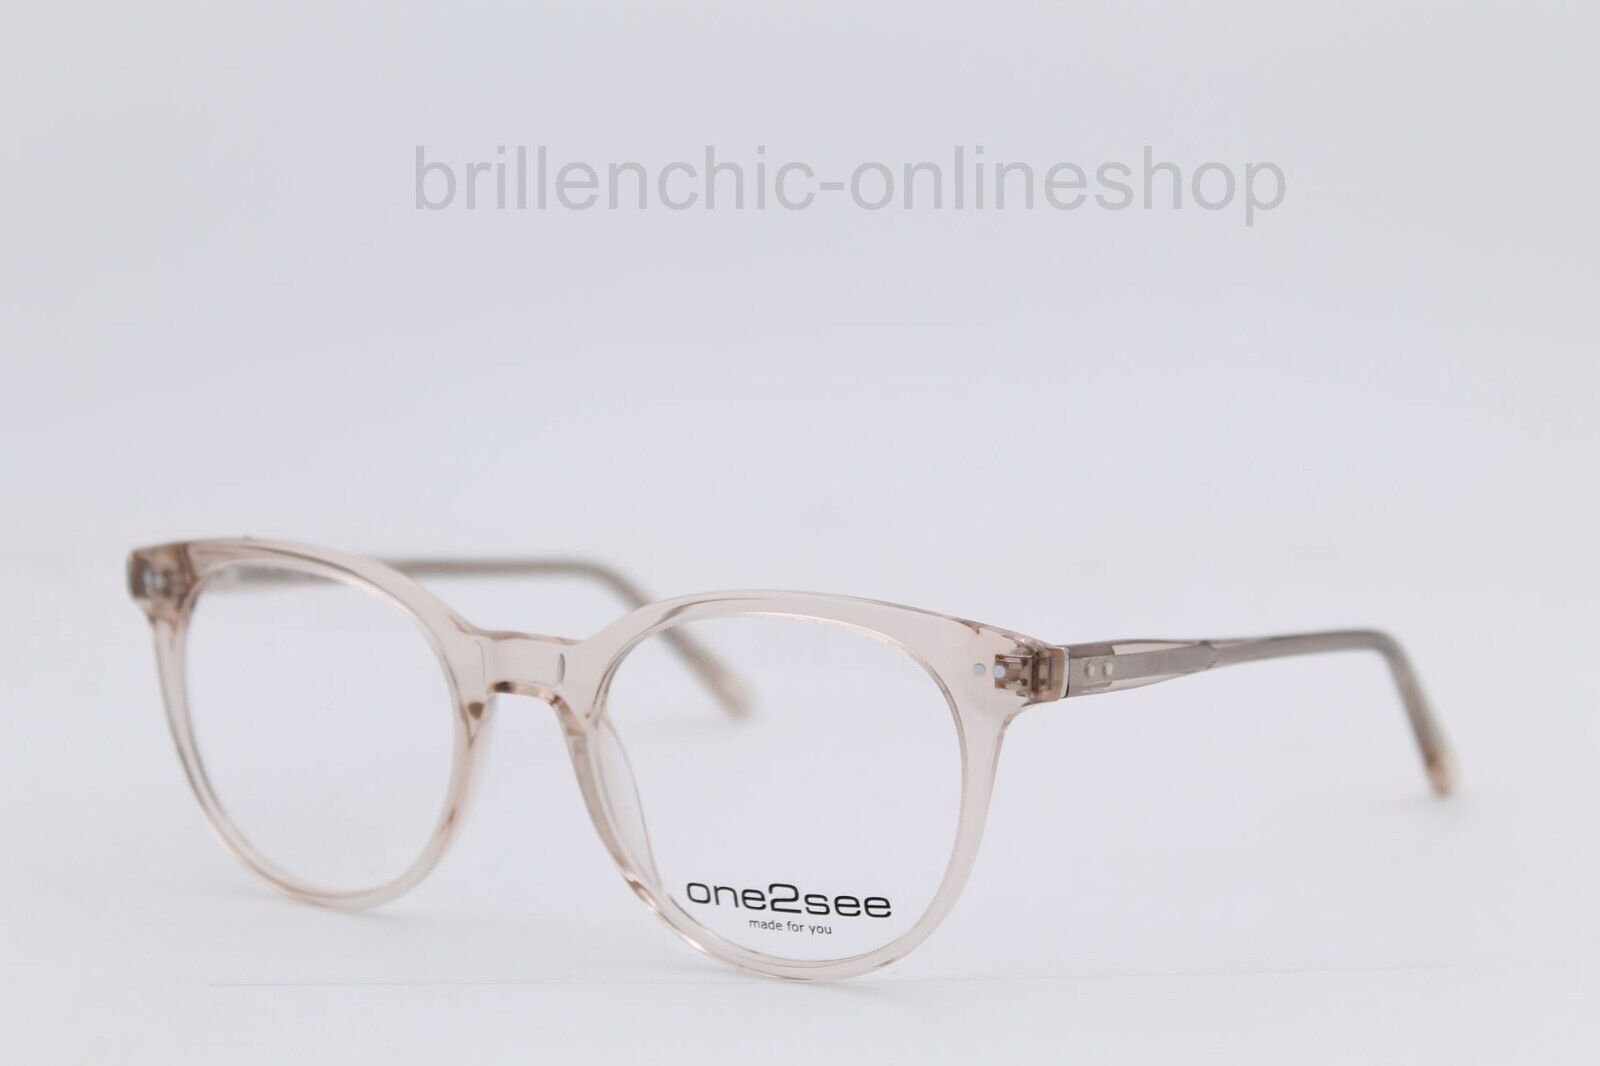 ONE2SEE Brille Modell TJALK col. 01 NEU